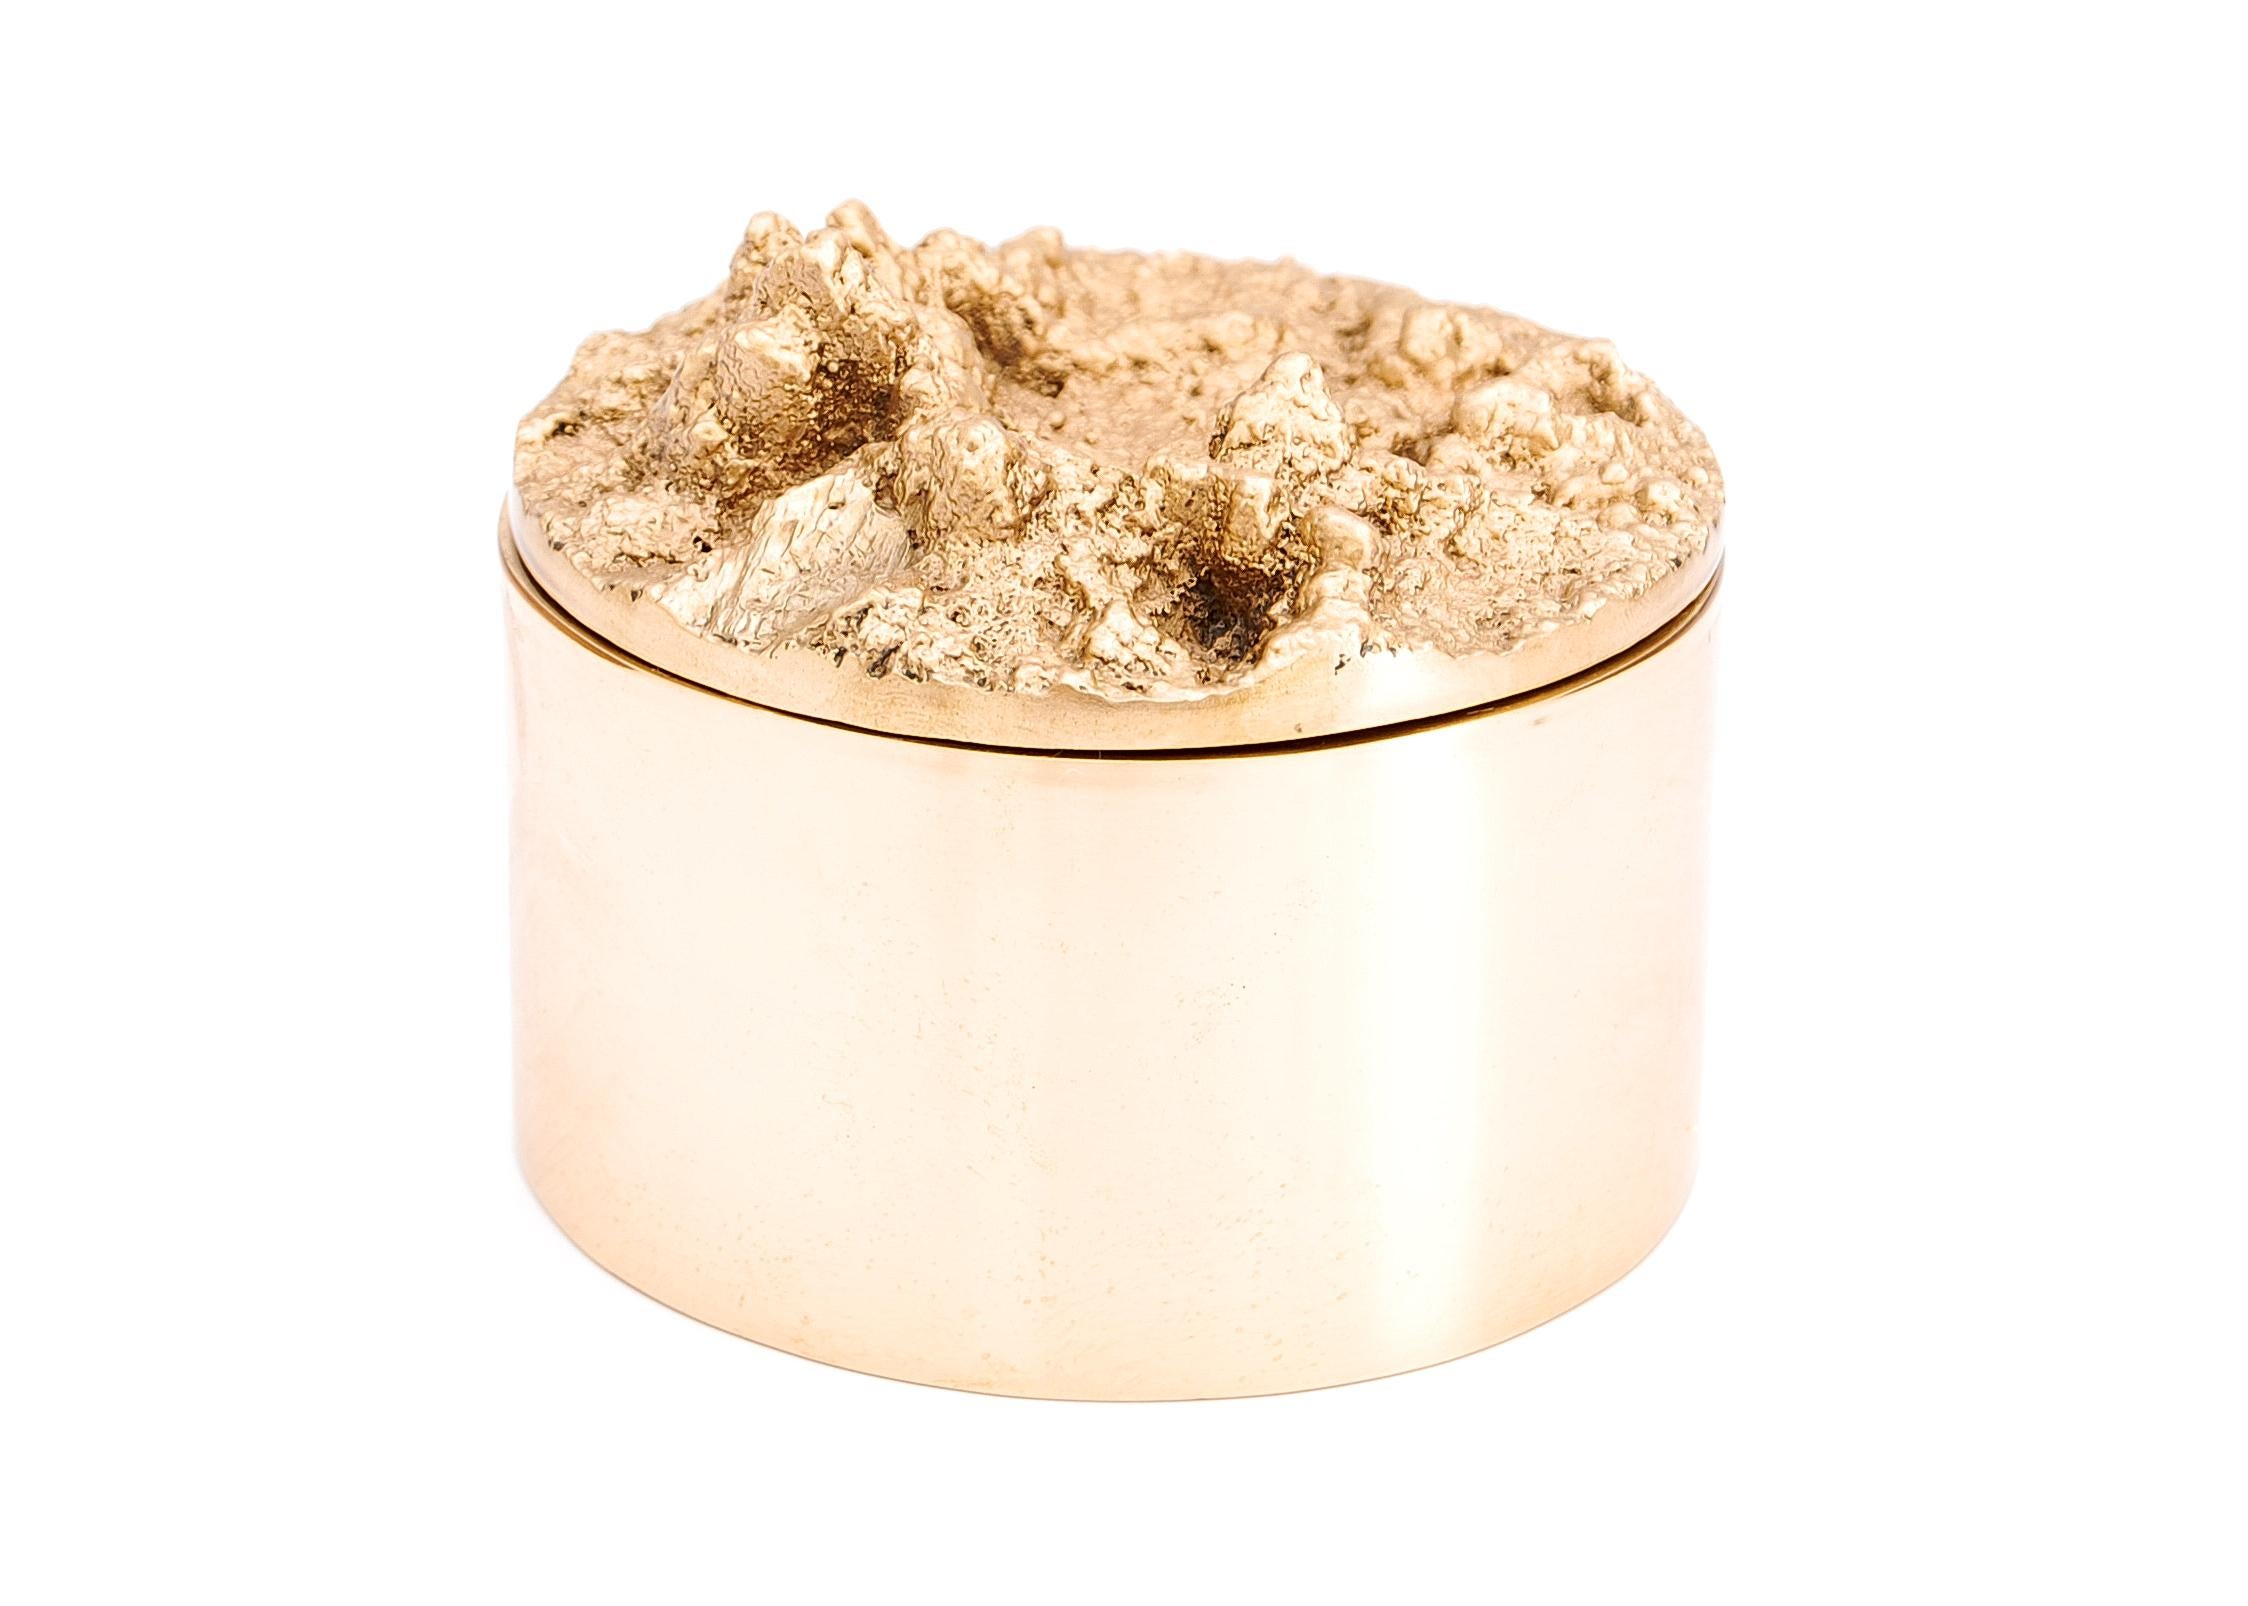 Joan small box by Fakasaka Design
Dimensions: W 10 cm D 10 cm H 6.5 cm.
Materials: polished bronze.
Also available in black/brown bronze. 

 FAKASAKA is a design company focused on production of high-end furniture, lighting, decorative objects,